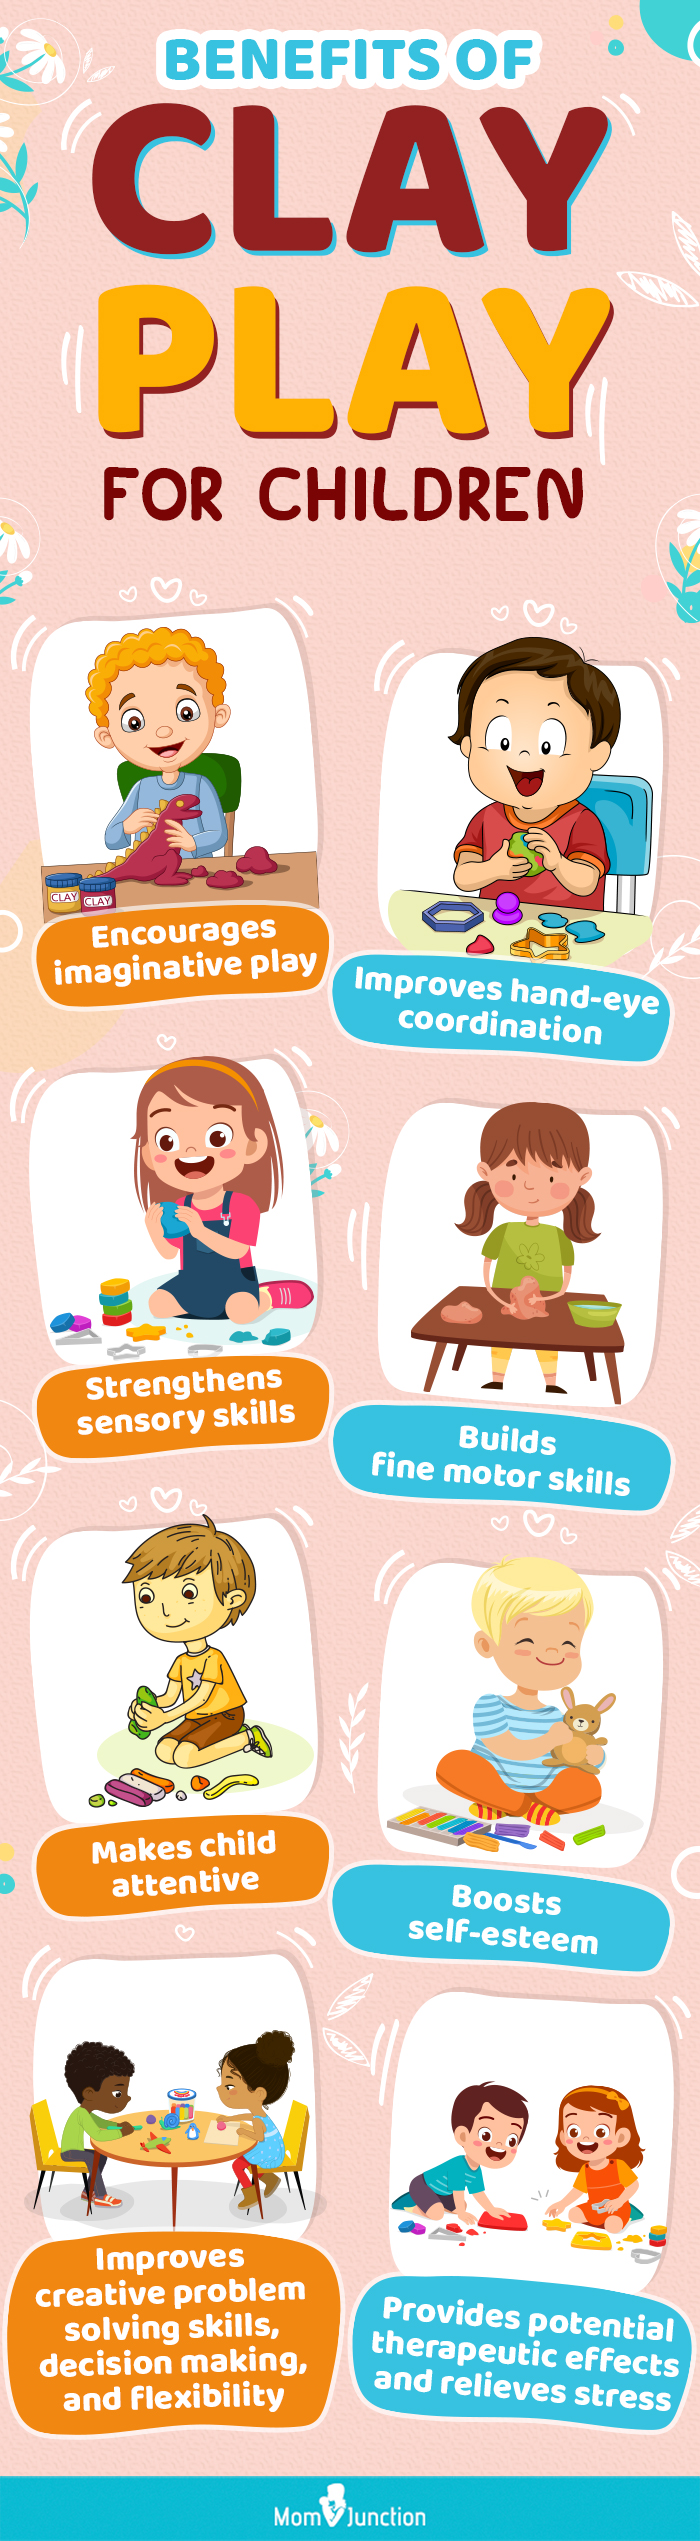 benefits of clay play for children (infographic)